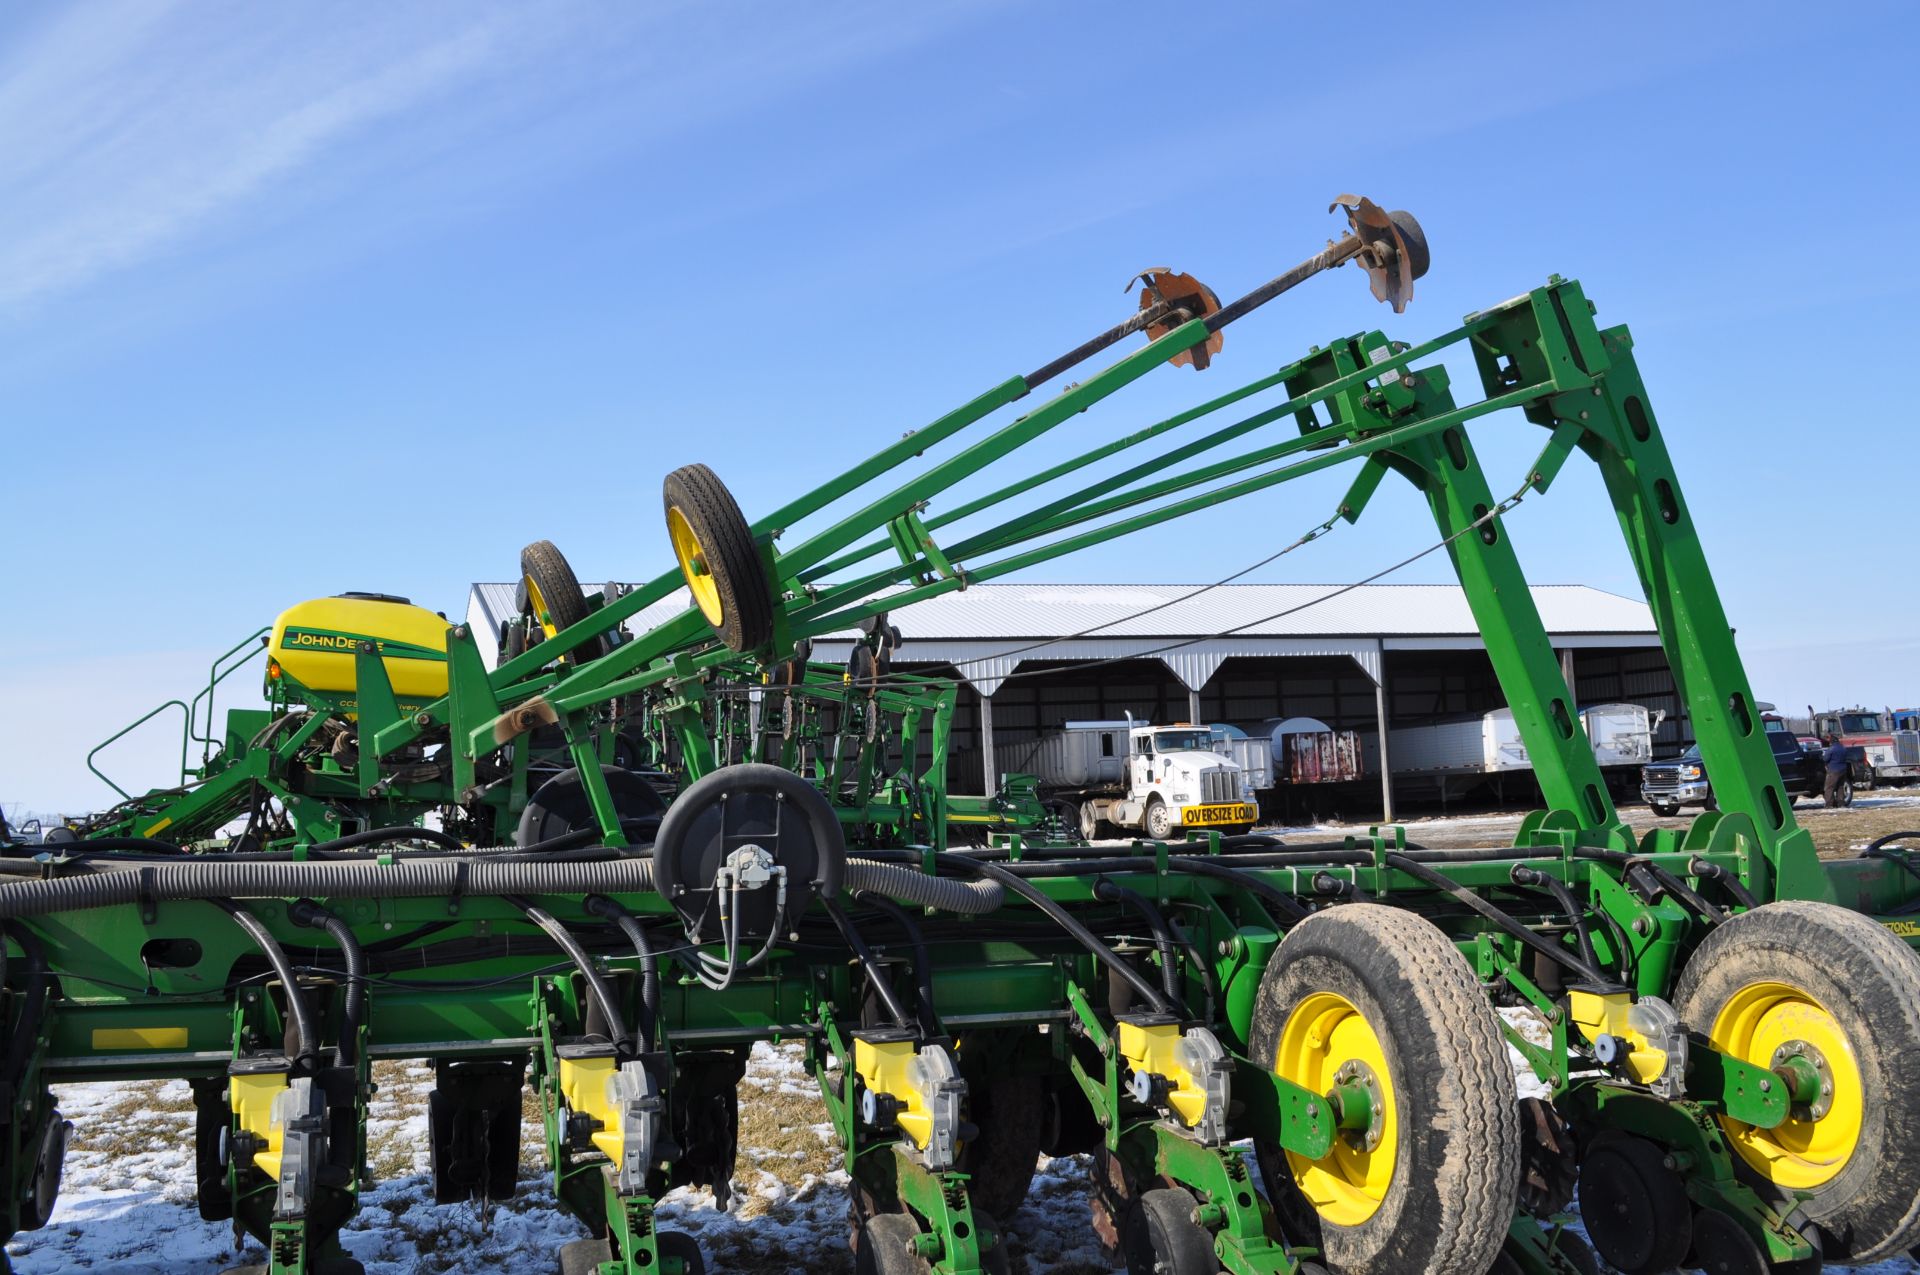 John Deere 1770 NT 24 row 30” planter, front fold, CCS, Refuge Plus tank, markers, no-till coulters, - Image 24 of 25